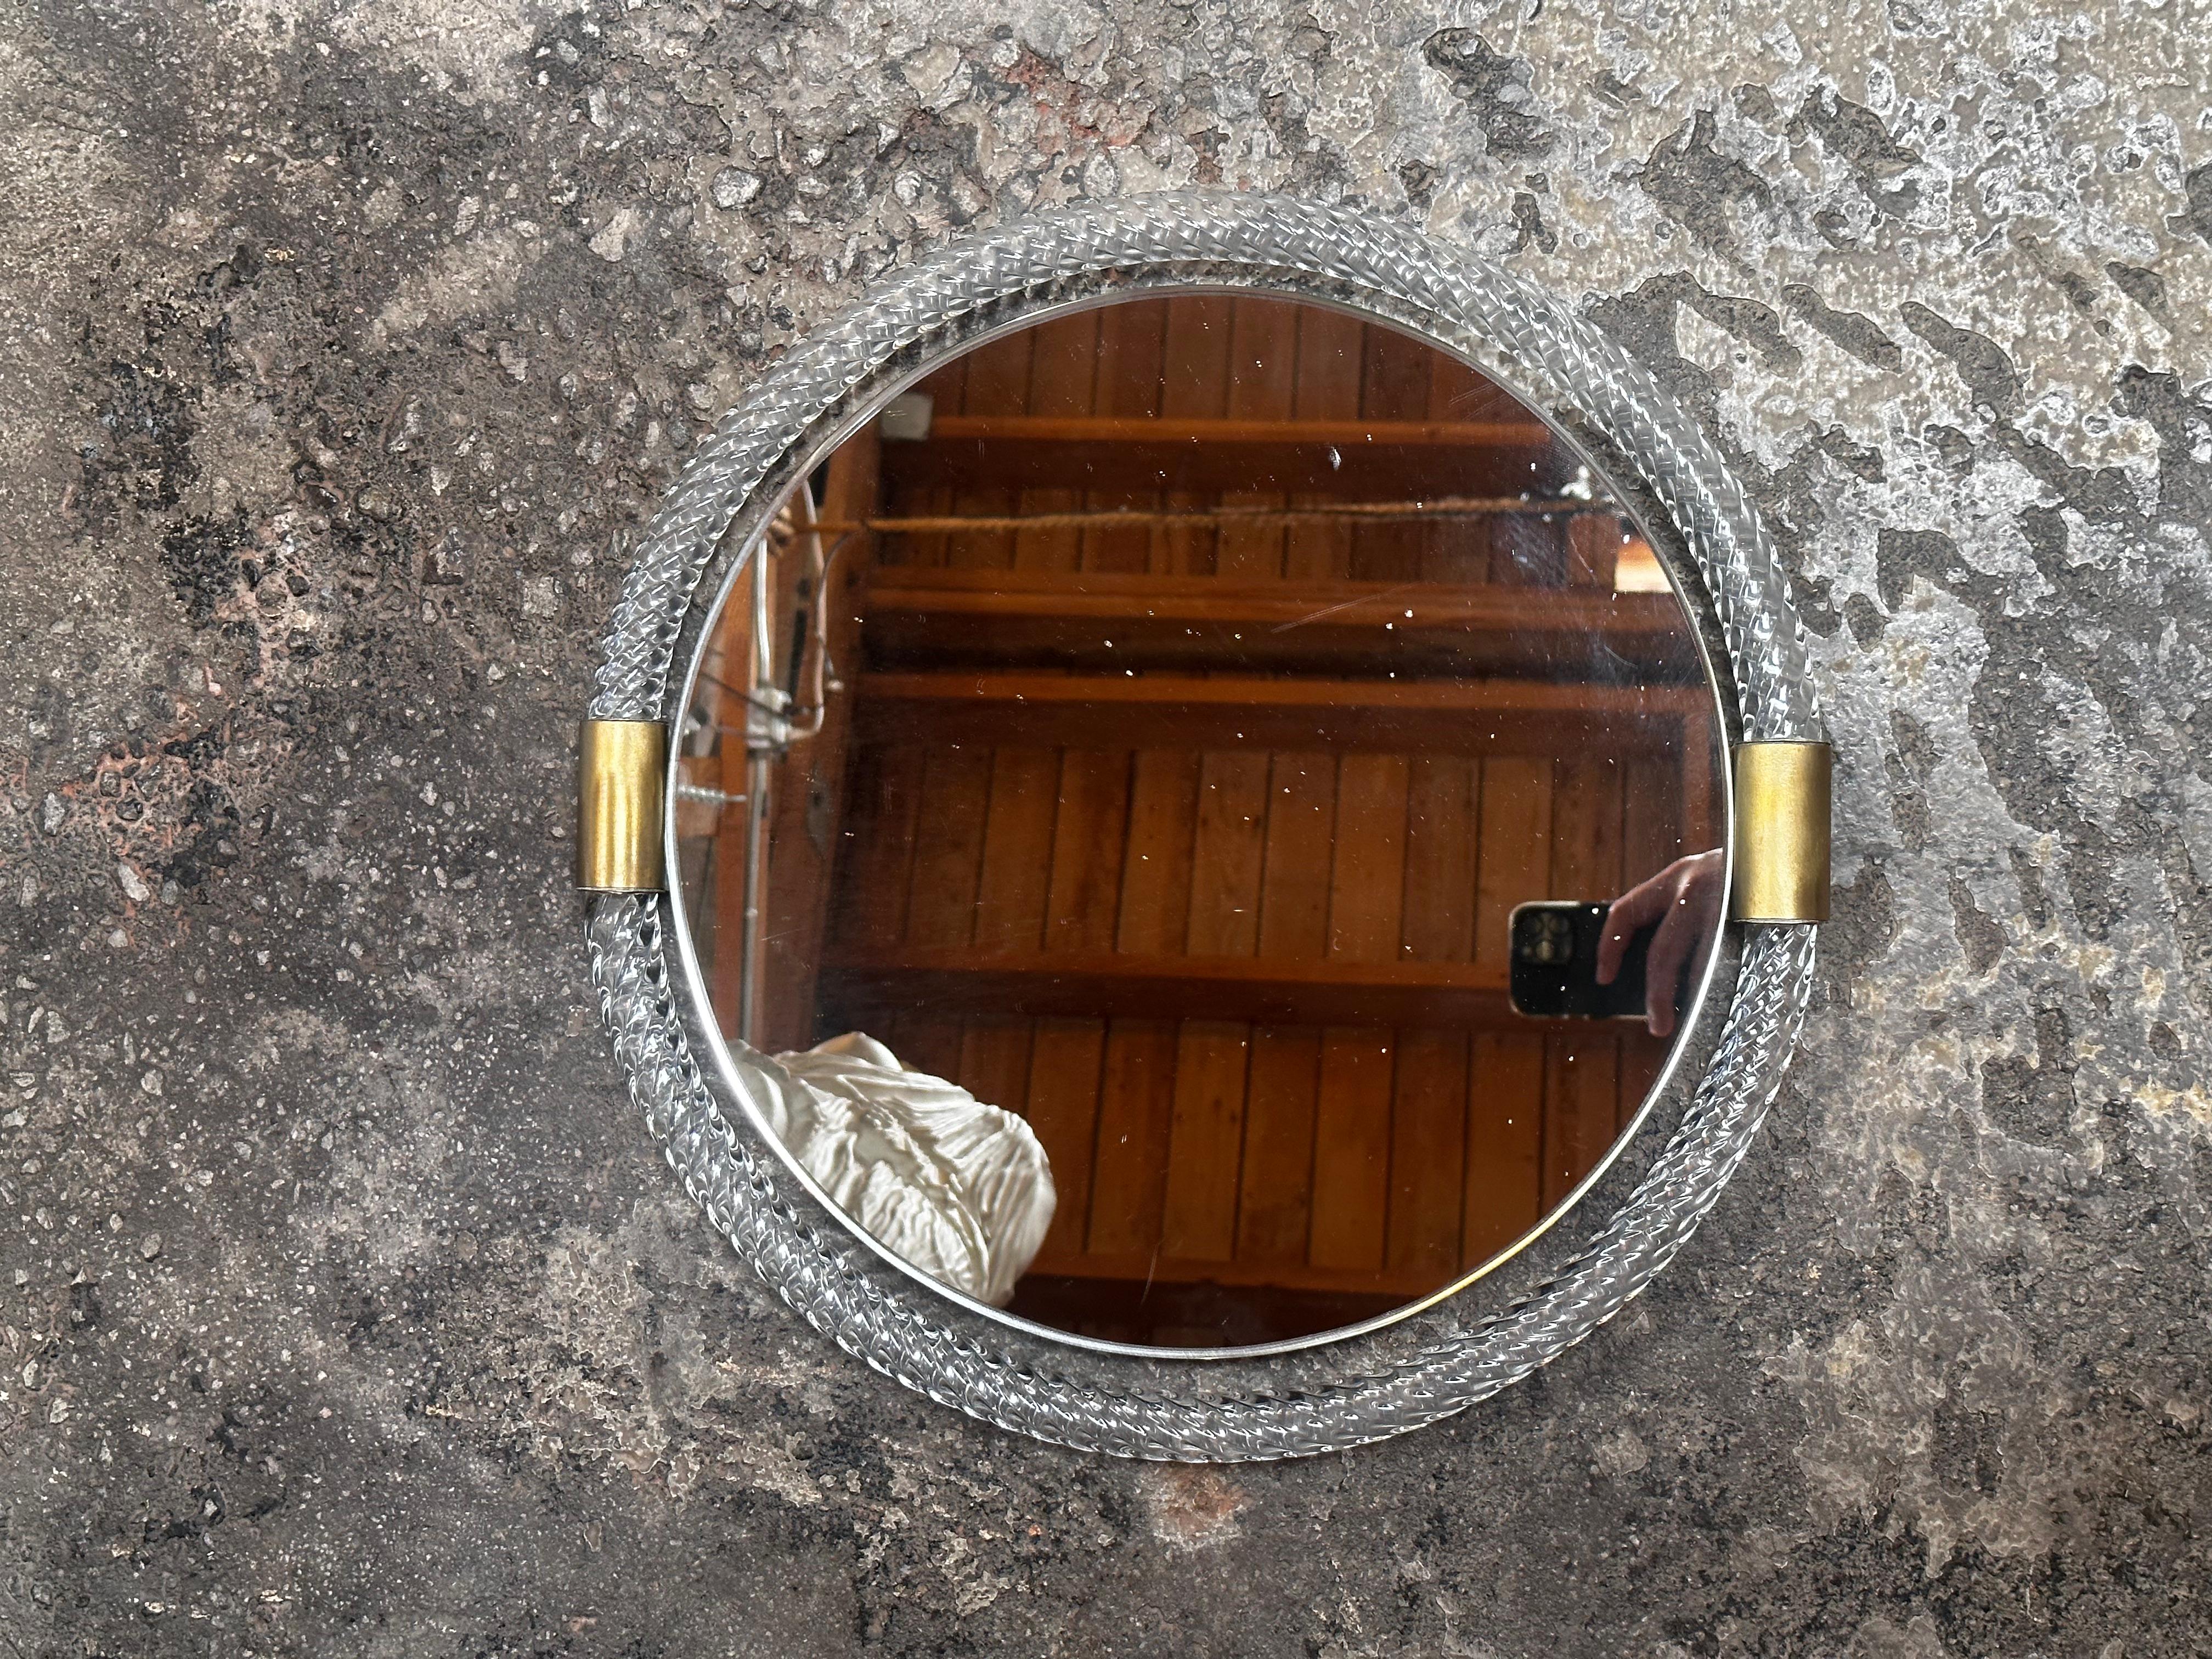 The Mid Century Italian Round Murano Wall Mirror from the 1960s is a circular mirror that exemplifies the iconic design of the era. Created in Murano, Italy, it displays the exquisite craftsmanship and artistic flair that Murano glasswork is